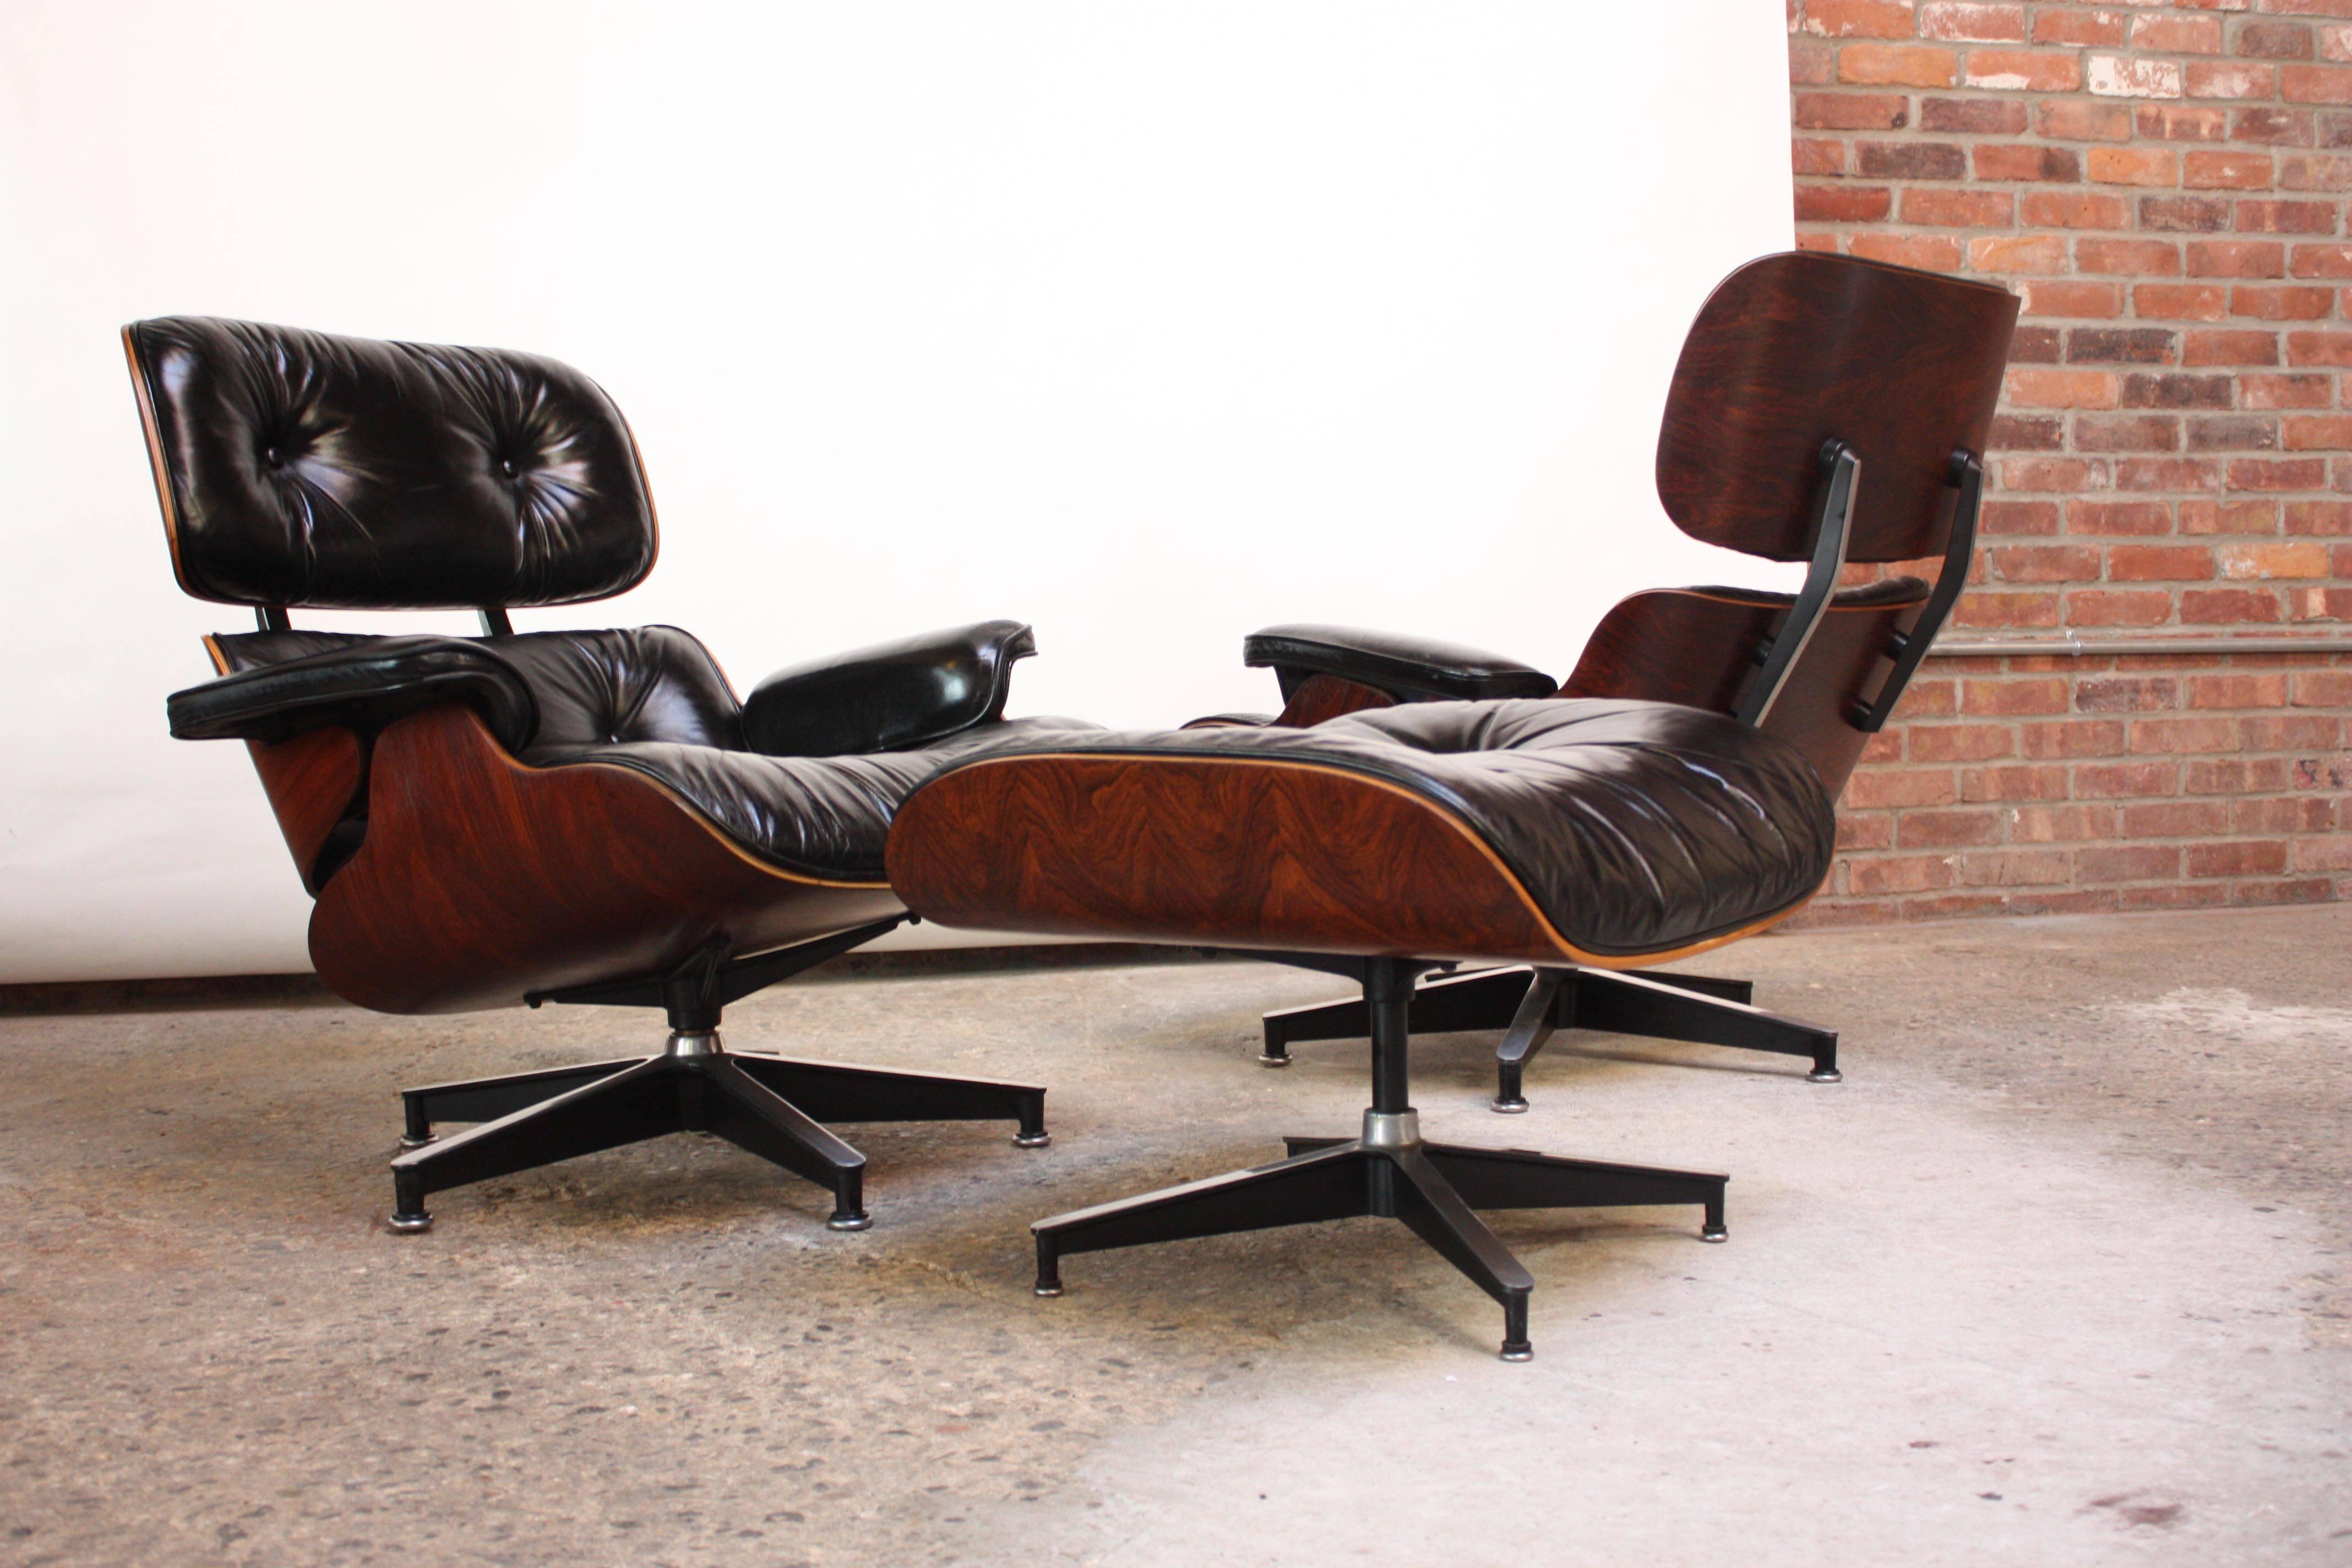 Iconic pair of 670 lounge chairs and single matching 671 ottoman by Charles and Ray Eames for Herman Miller. These are early-mid 1970s examples (one chair is marked 1975, as shown) and retain the black rectangular Herman Miller tags.
These will come